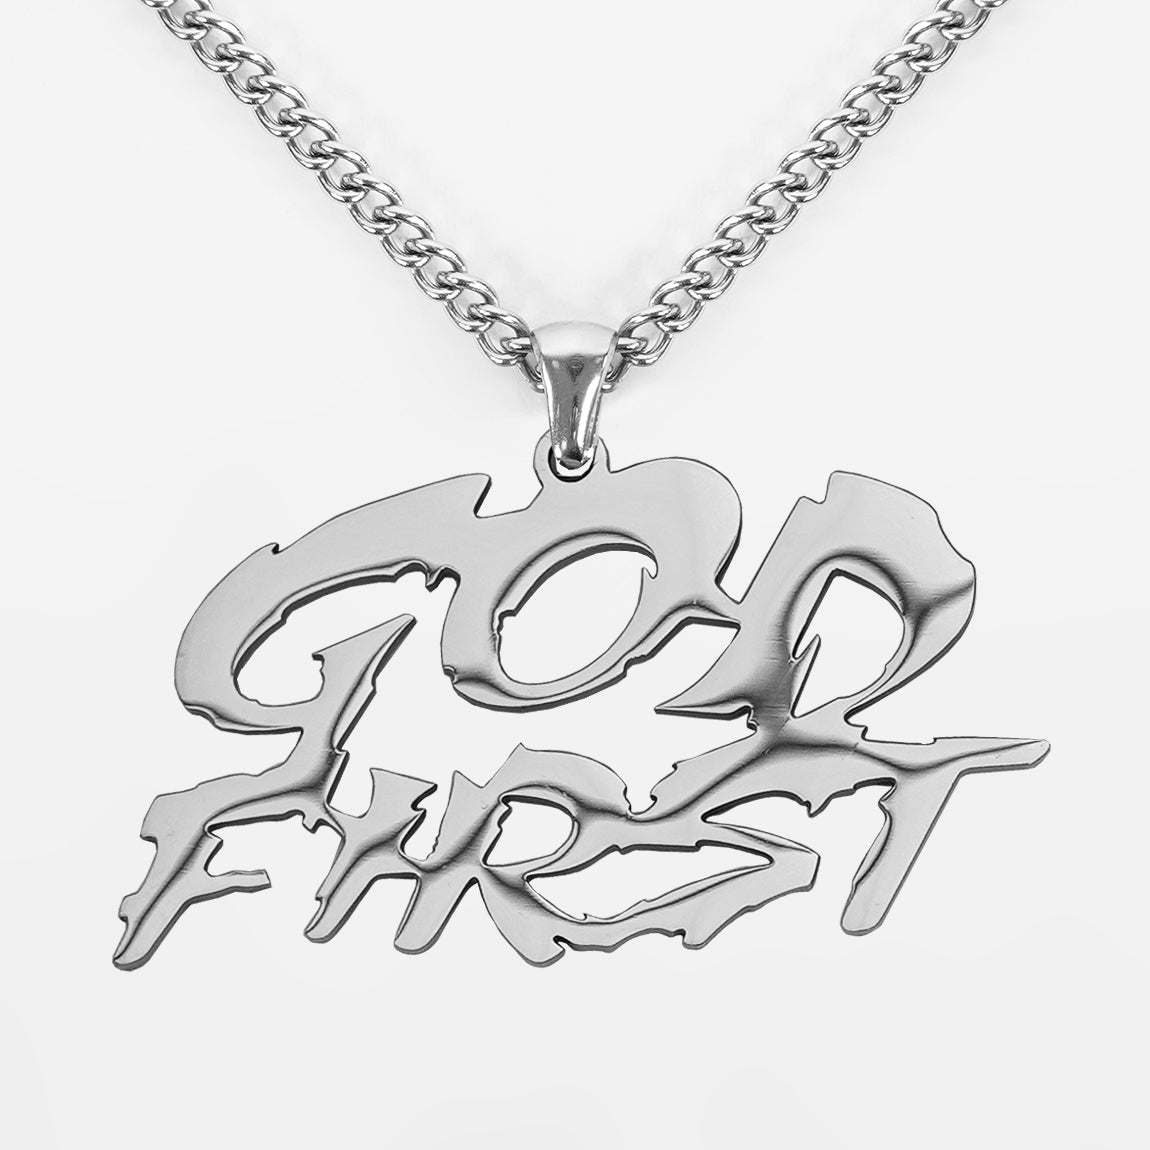 God First Pendant with Chain Necklace - Stainless Steel